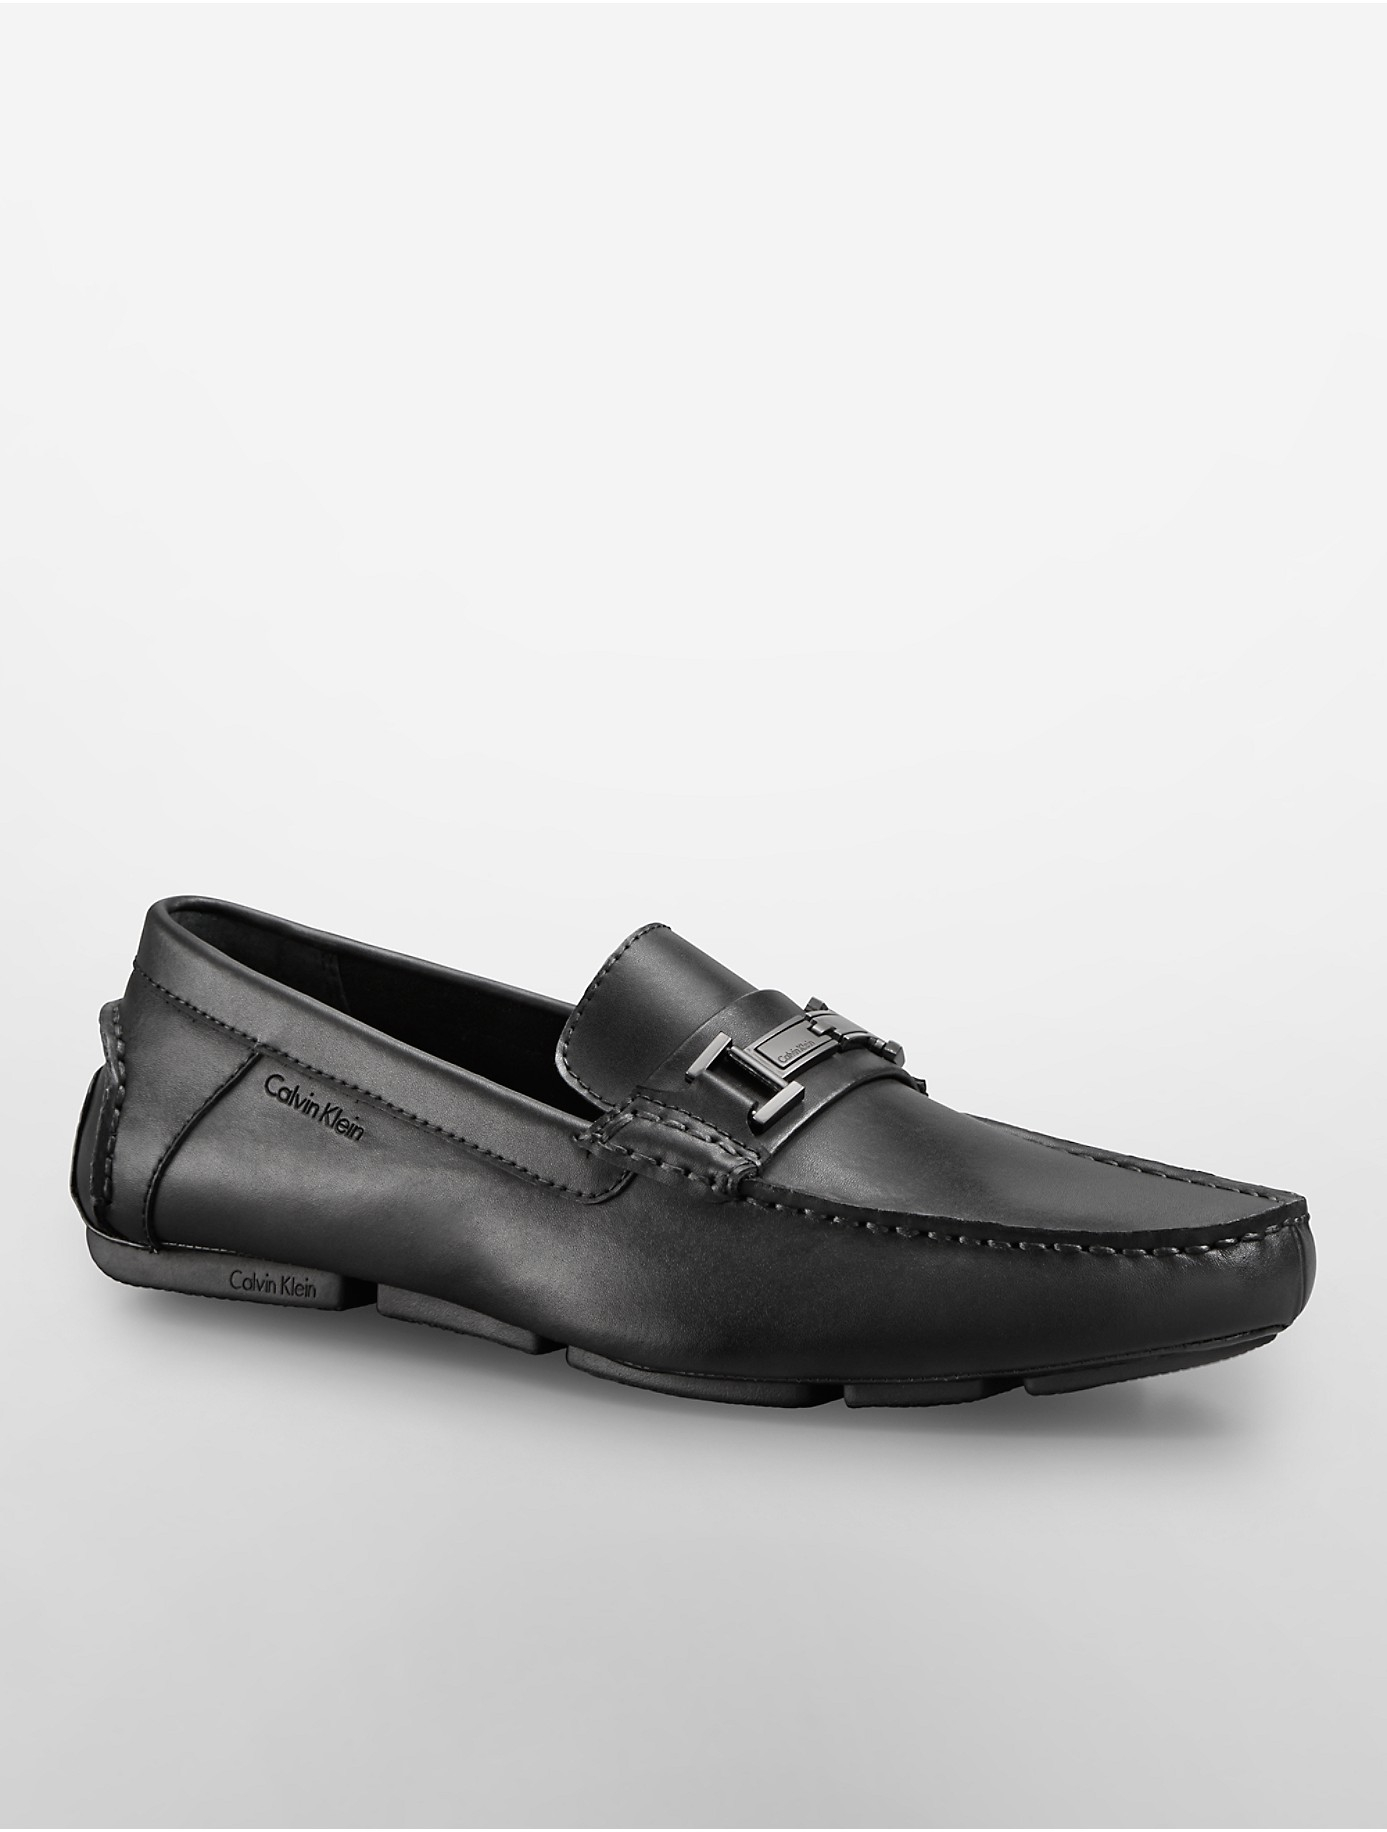 90 Limited Edition Calvin klein shoes neil loafers for All Gendre